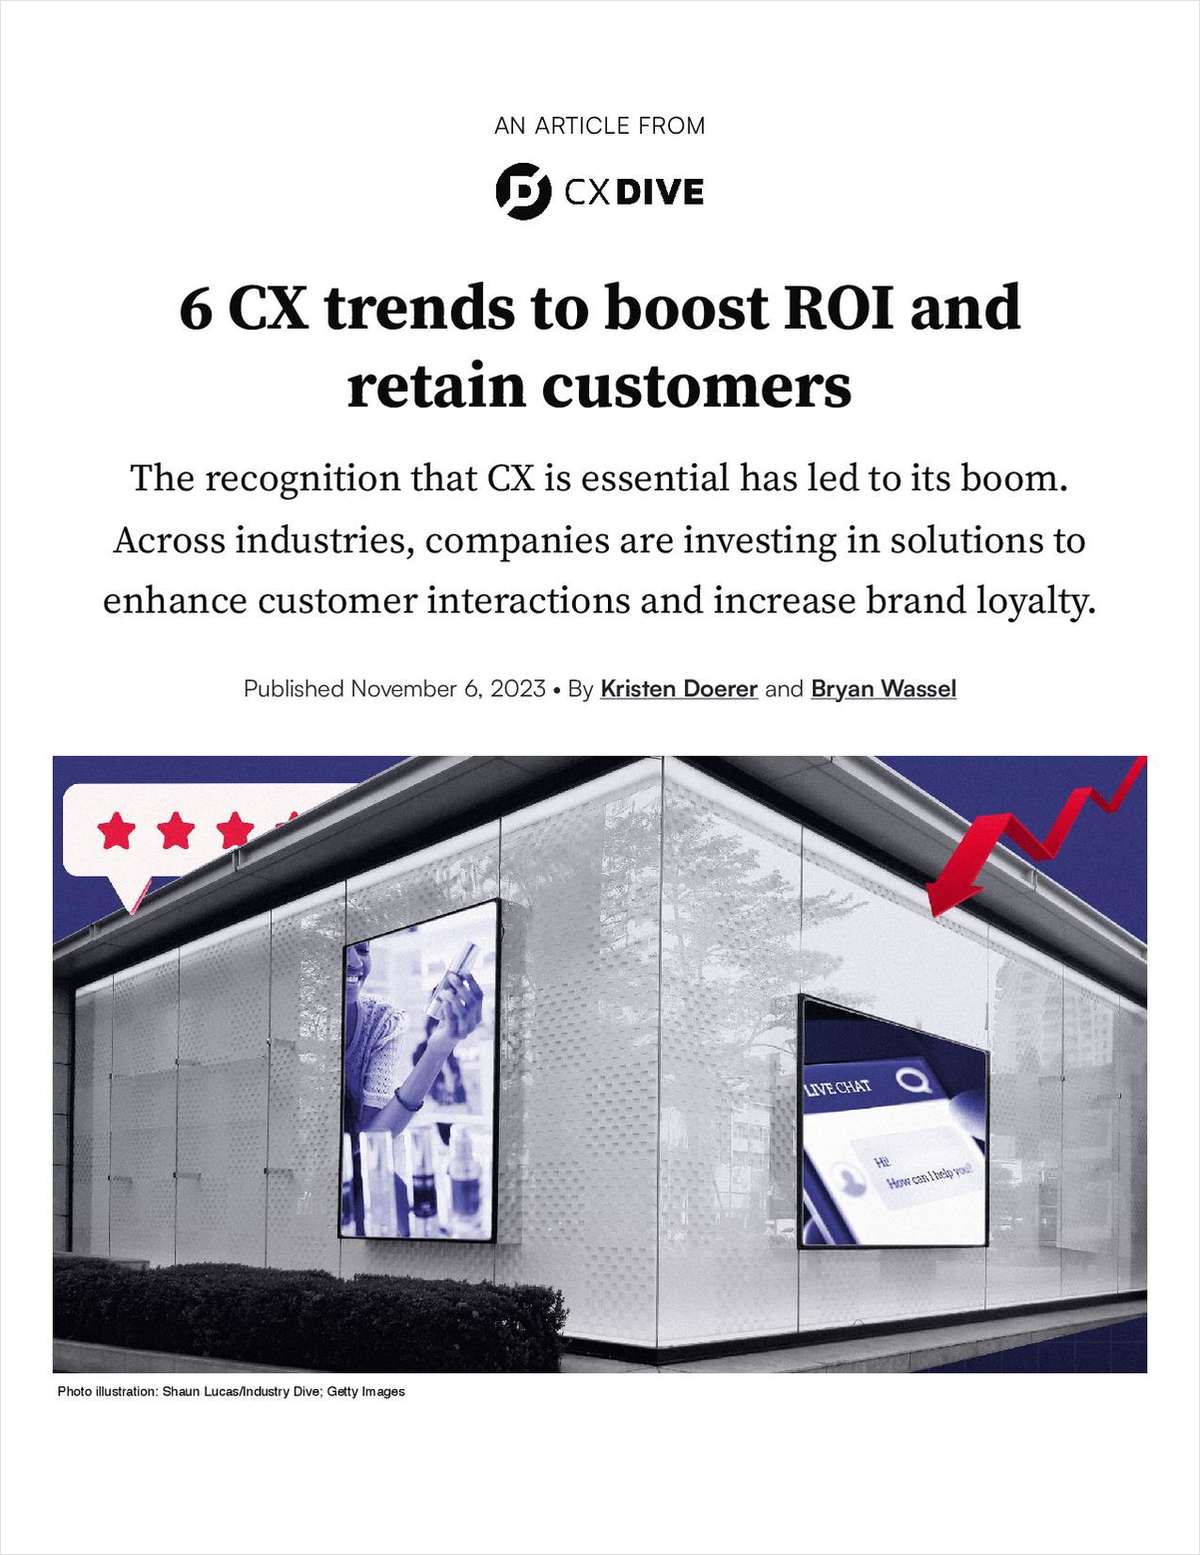 6 CX Trends to Boost ROI and Retain Customers